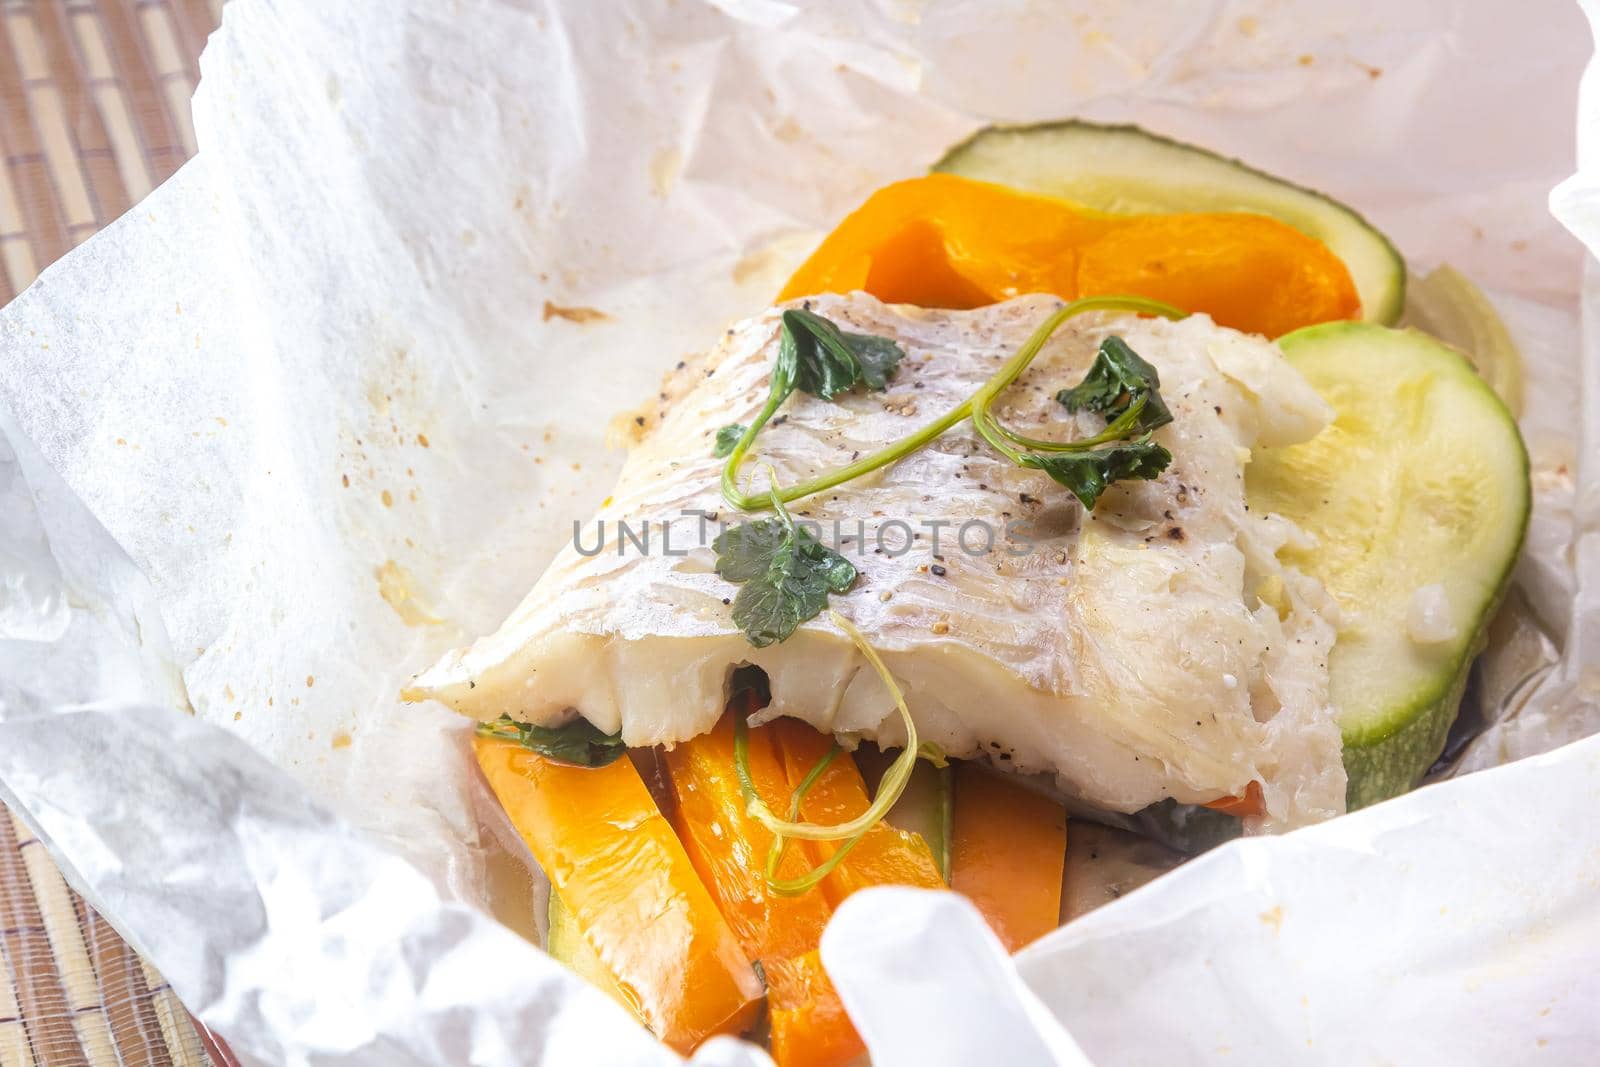 White fish fillet with vegetables in rustic style. Healthy eating: cooked fish fillet with vegetables garnish. Diet food with white fish and vegetables. Steam vegetables with roasted zander fillet.